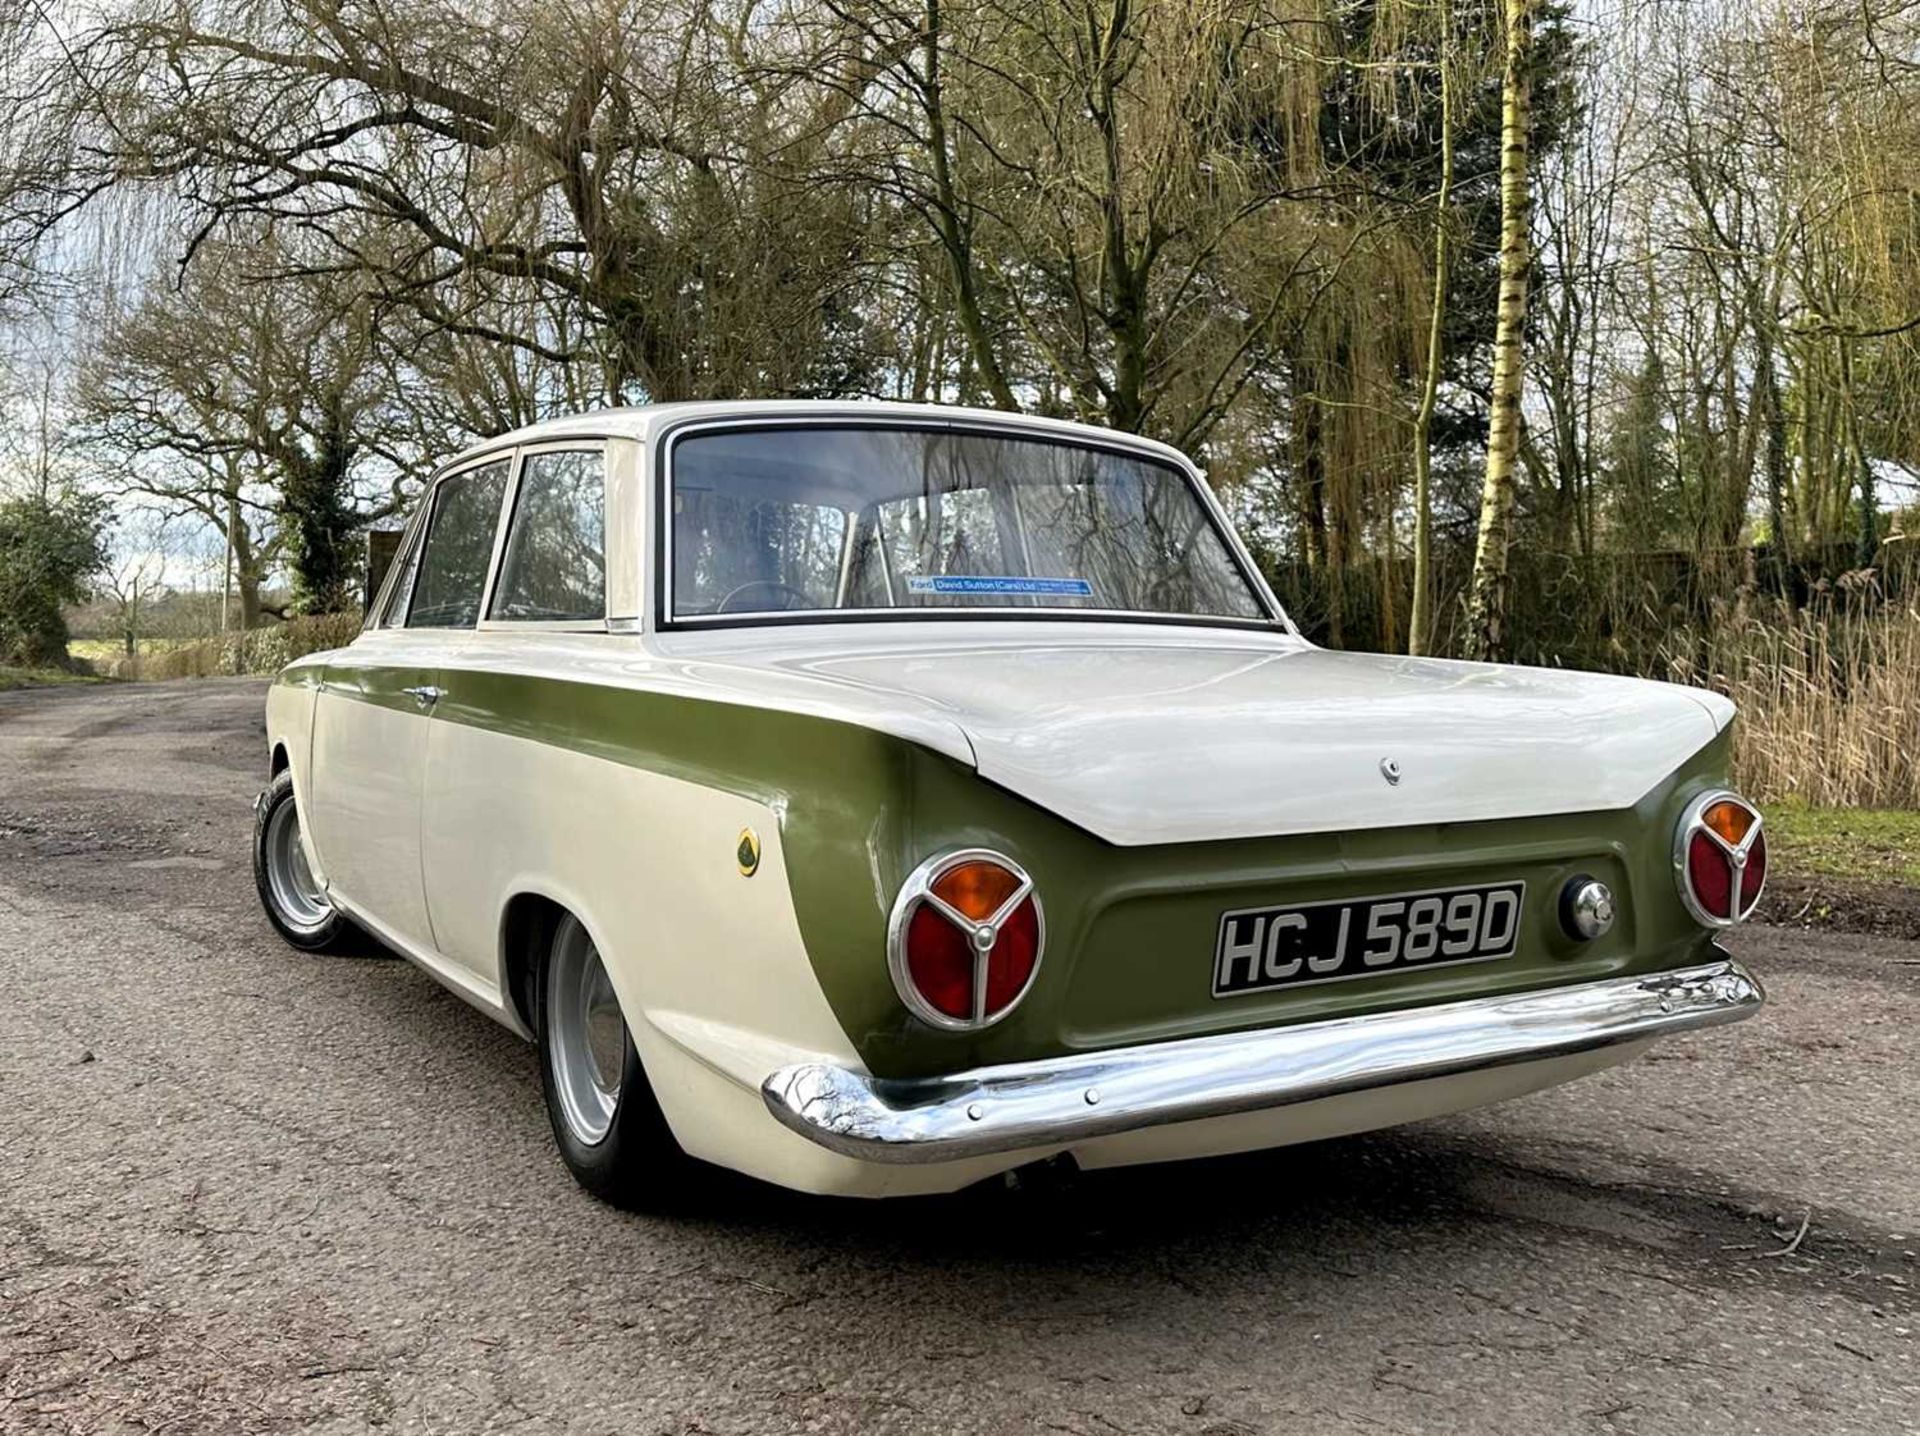 1963 Ford Lotus Cortina Pre-Aeroflow model, fitted with A-frame rear suspension - Image 23 of 58